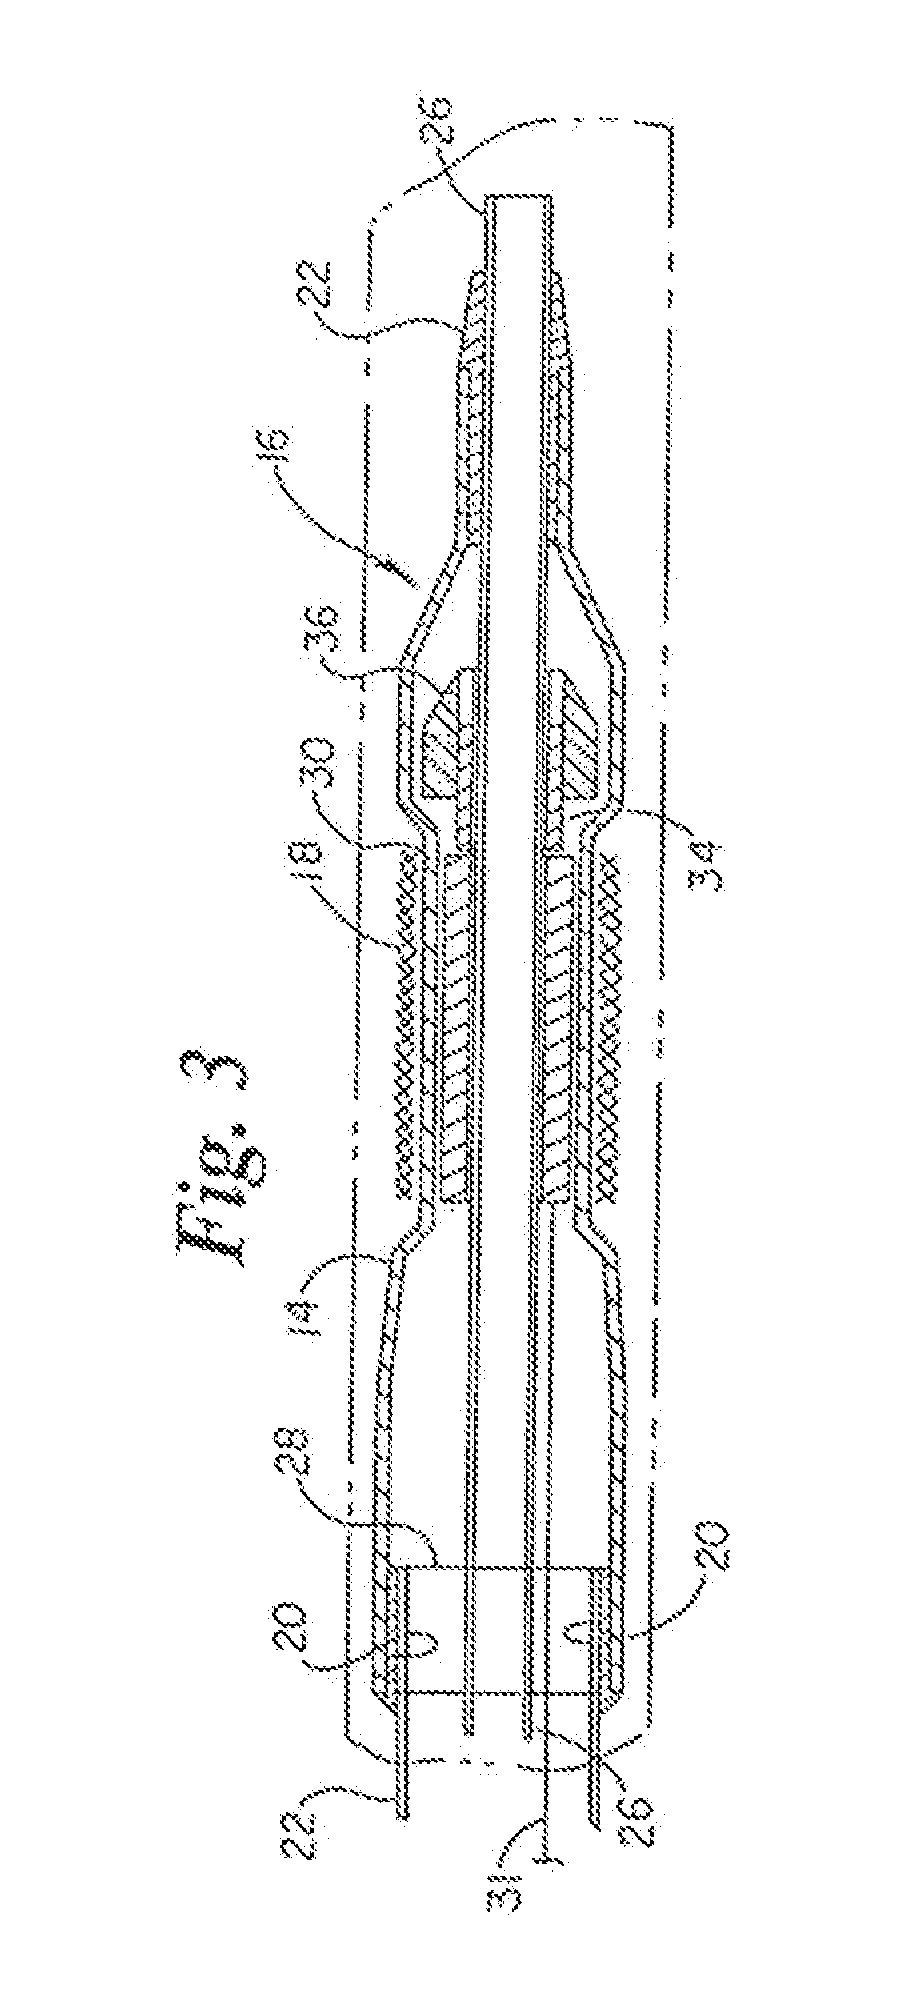 Stent Delivery System Having Stent Securement Apparatus